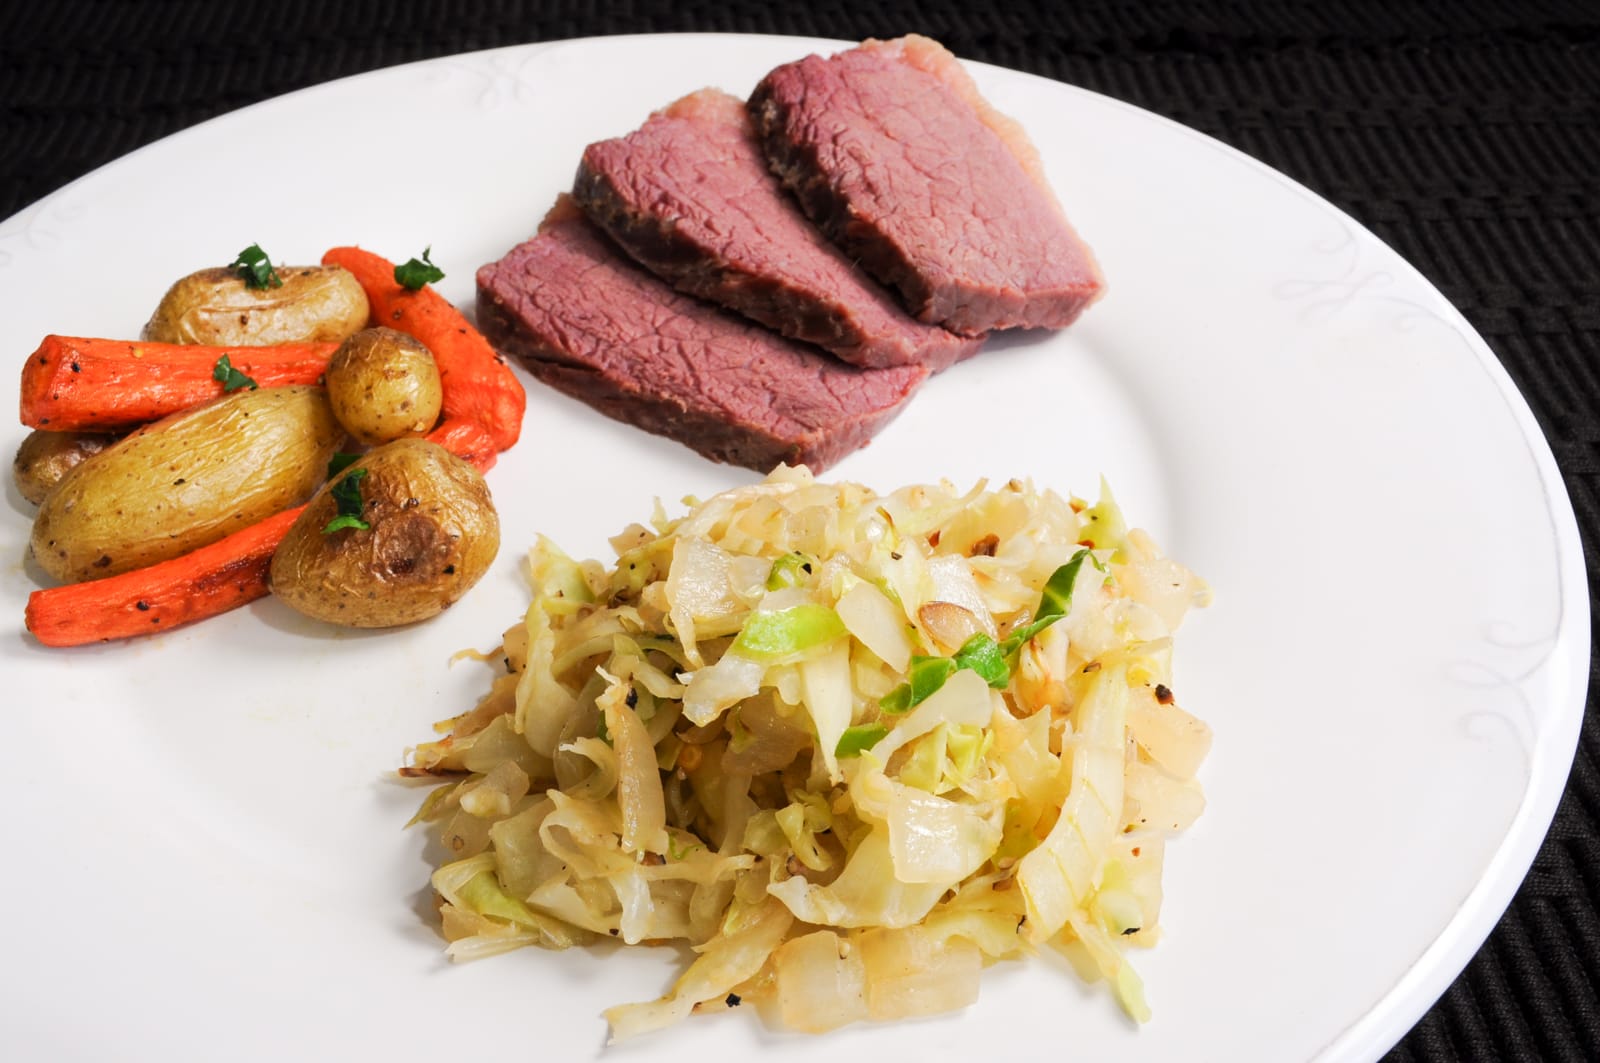 Corned Beef, Sautéed Cabbage and Onions, and Roasted Potatoes and Carrots